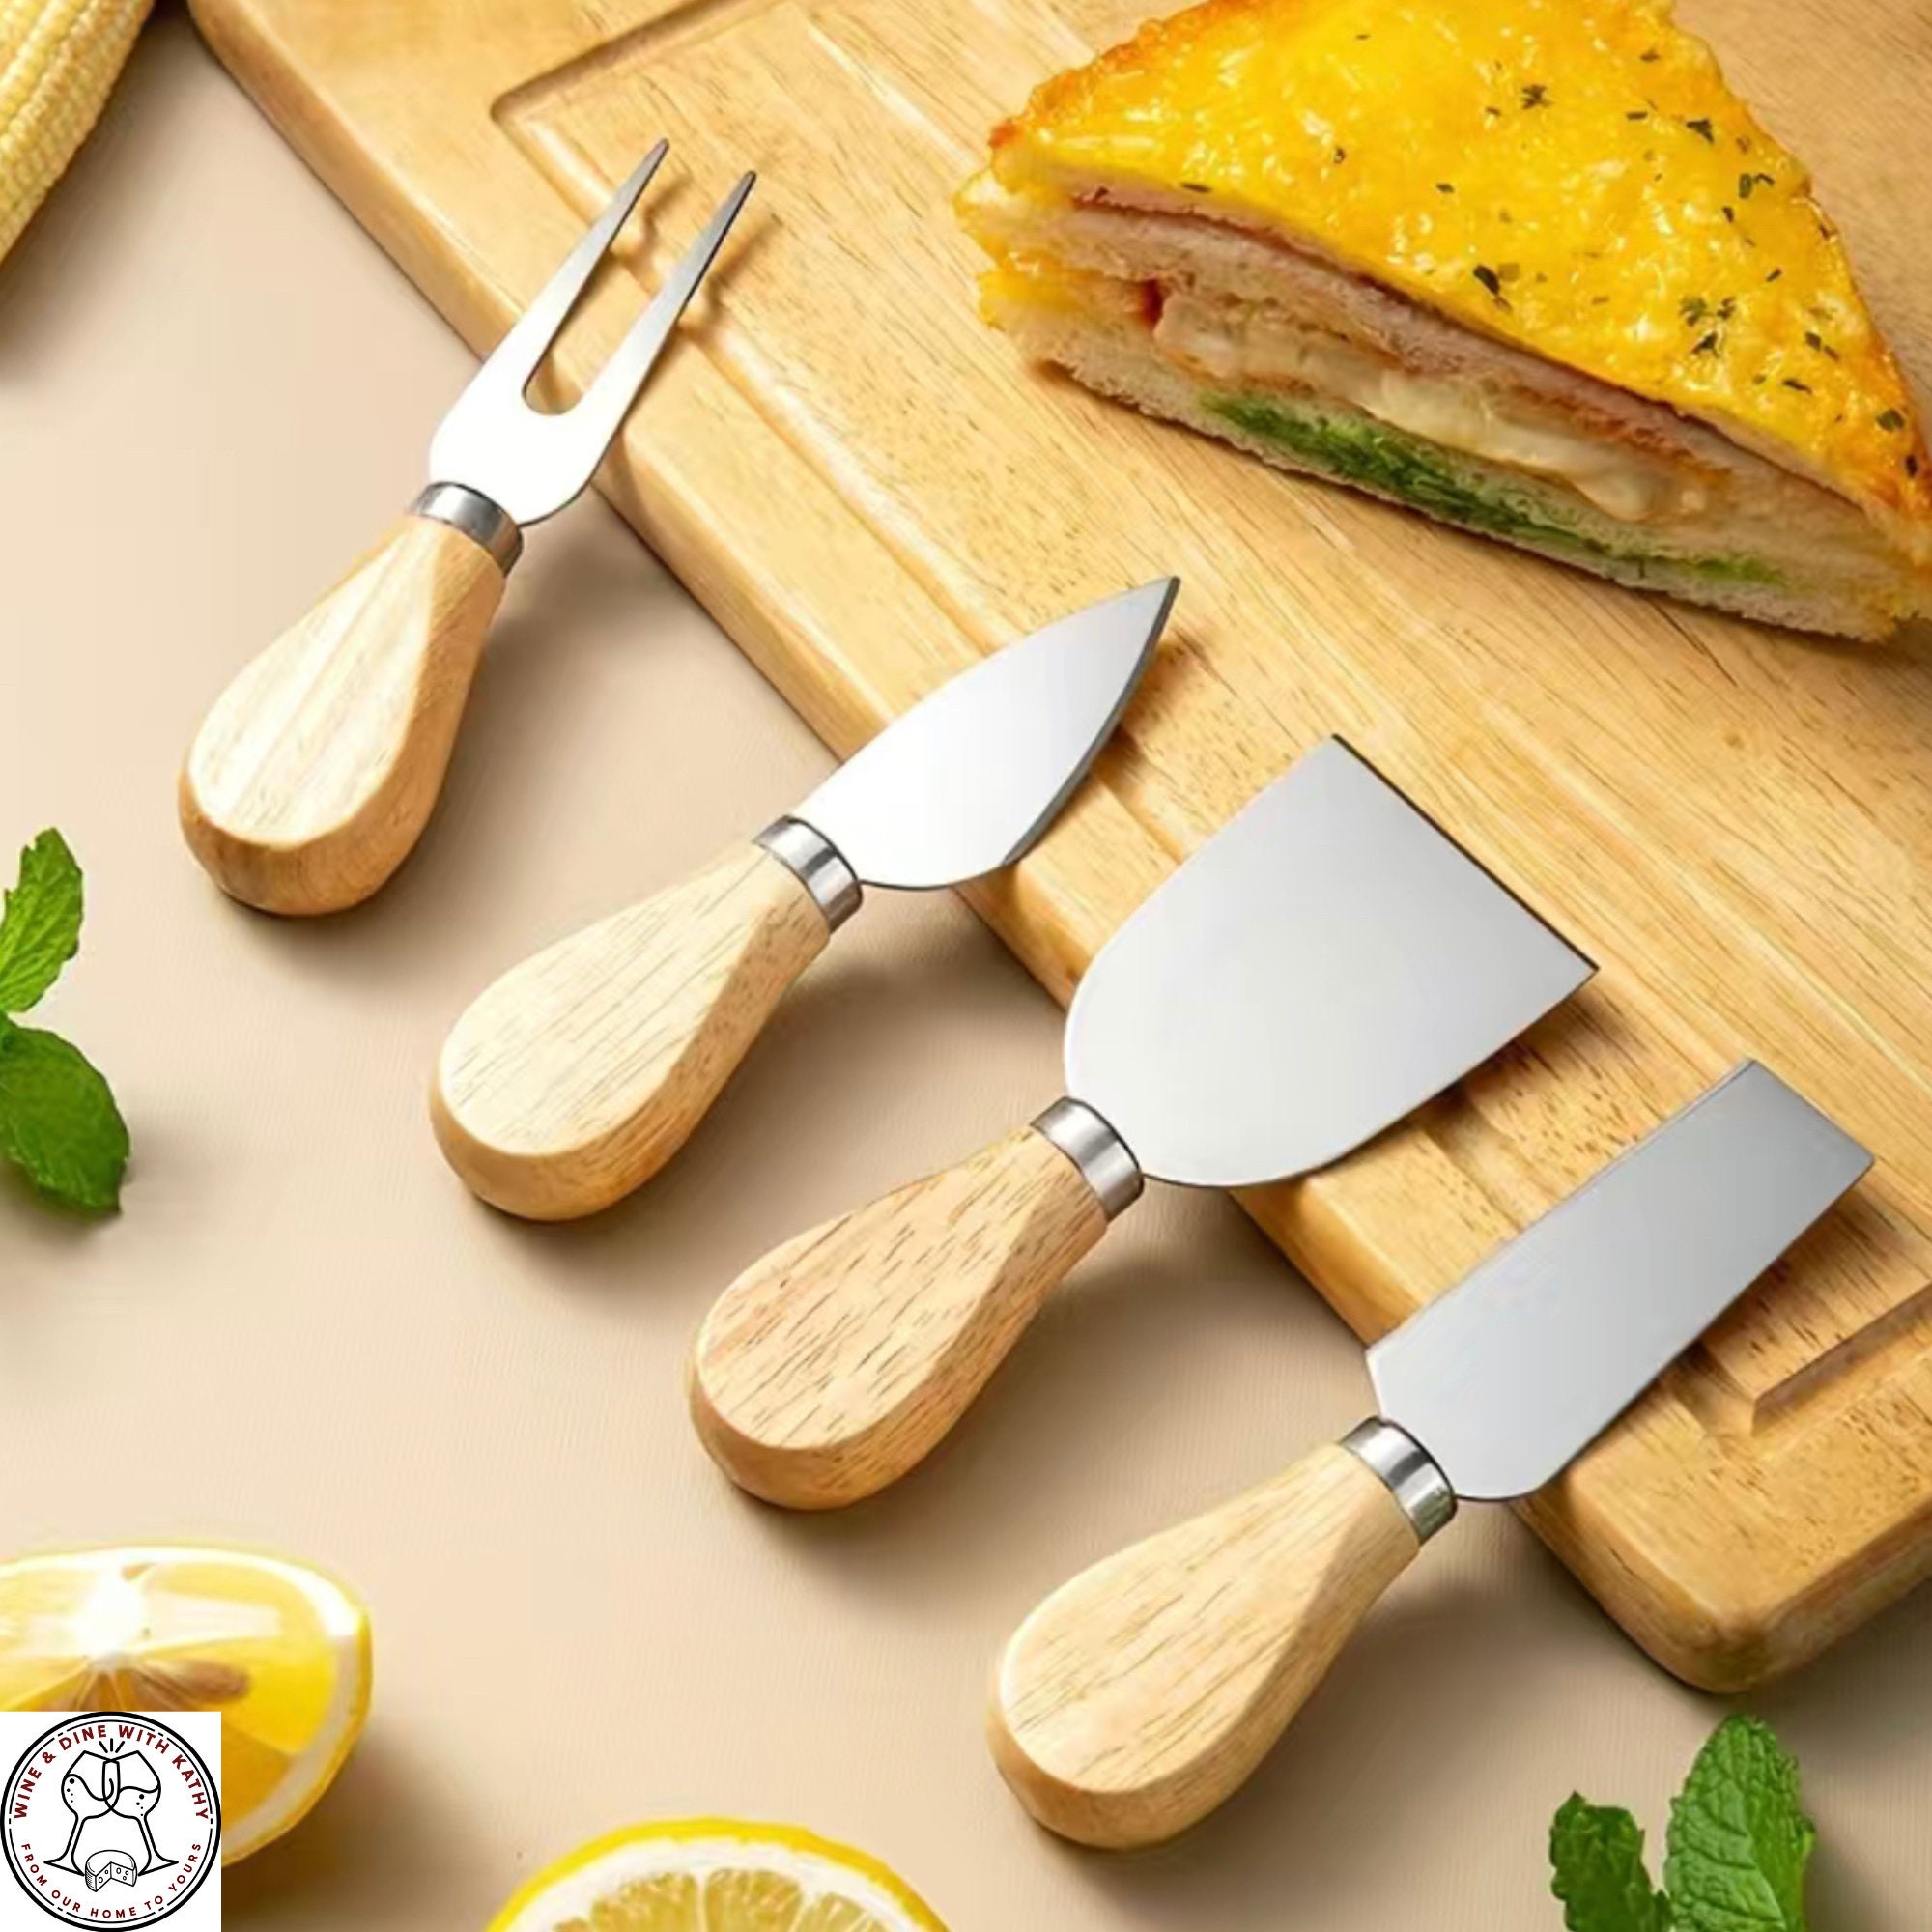 Cheese Knife Set, 4 Pieces Stainless Steel Cheese Knives for Charcuterie  Board, Charcuterie Knife Spreader Fork Set with Bamboo Wood Handle, Cheese